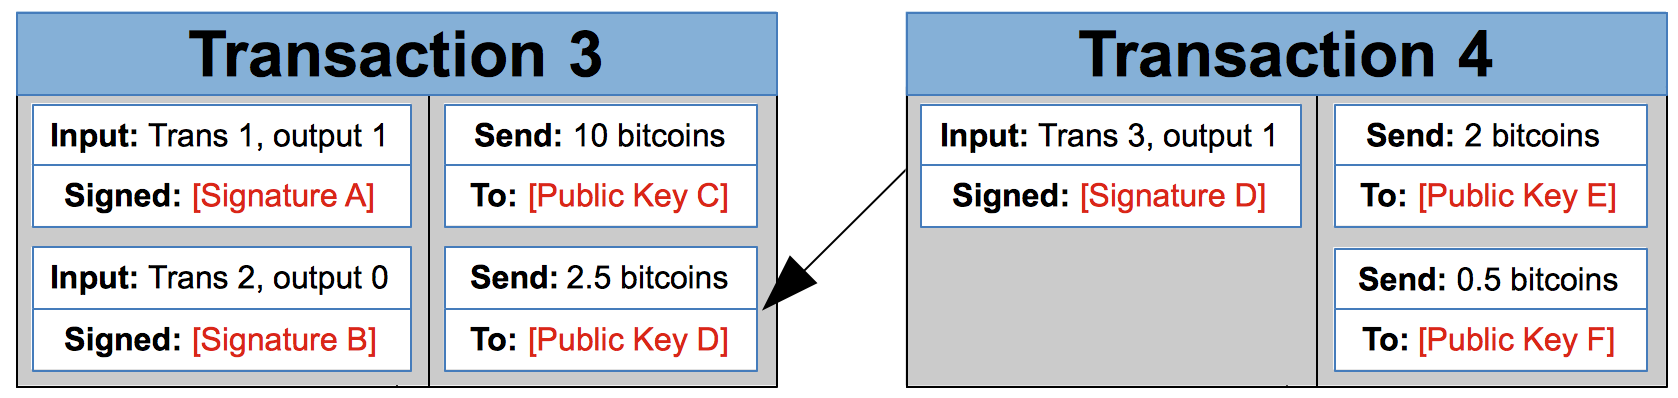 How To Find My Bitcoin Public Key